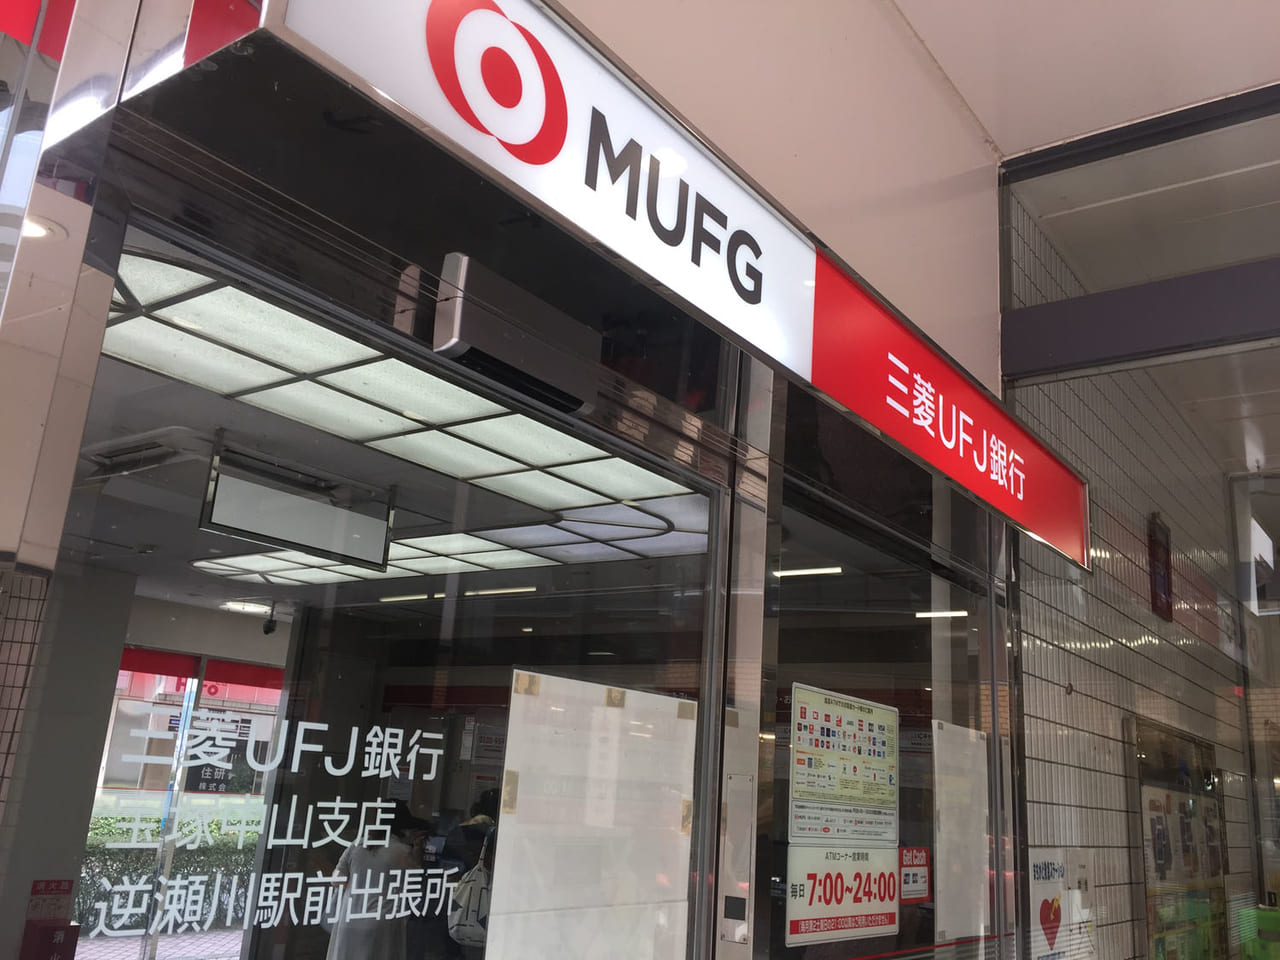 Mufg Atm Japan Banking Giants Mufg And Smbc To Start Sharing